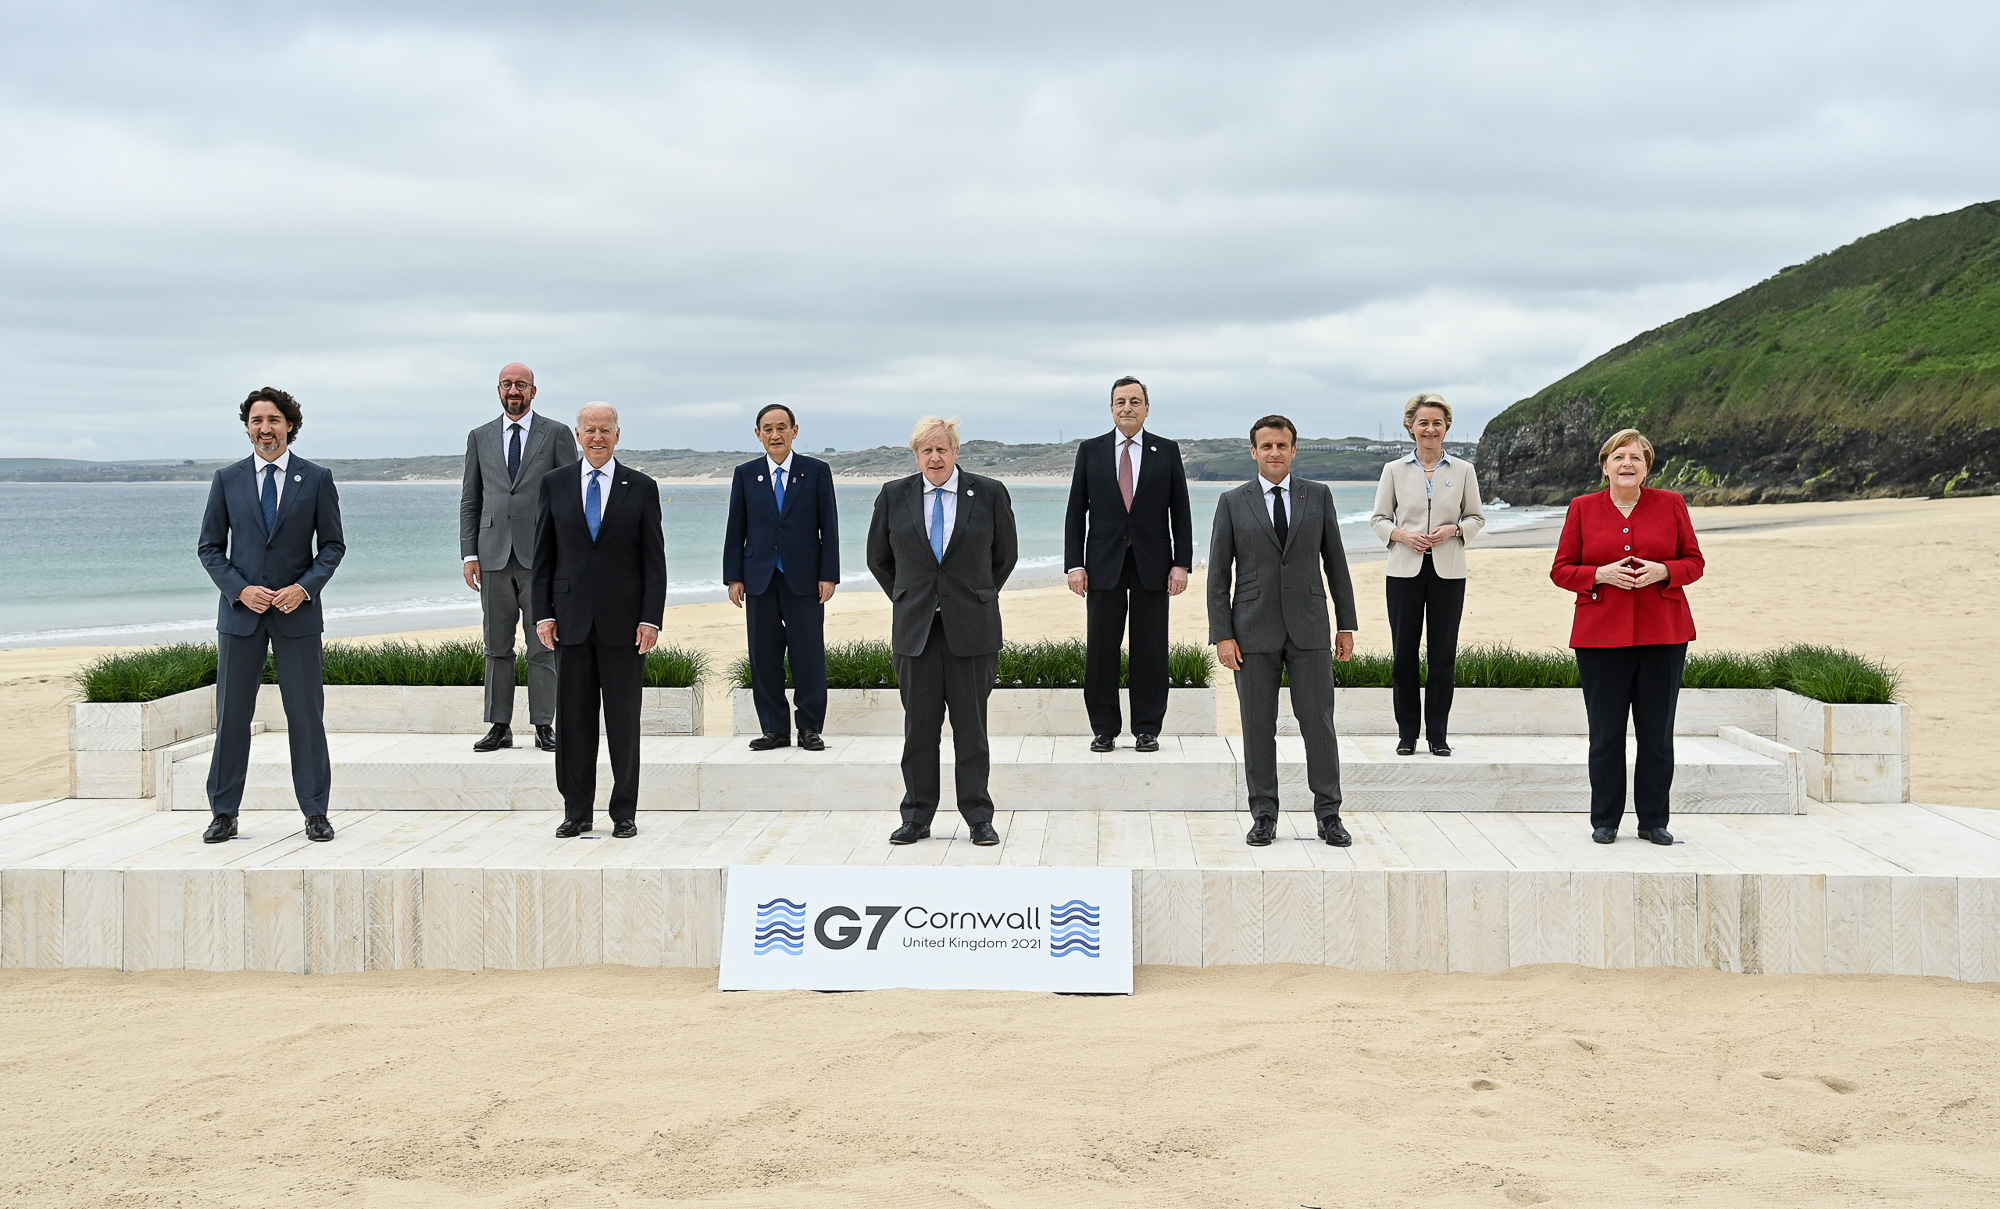 G7 foreign ministers: Russia will face 'massive consequences' if it invades Ukraine